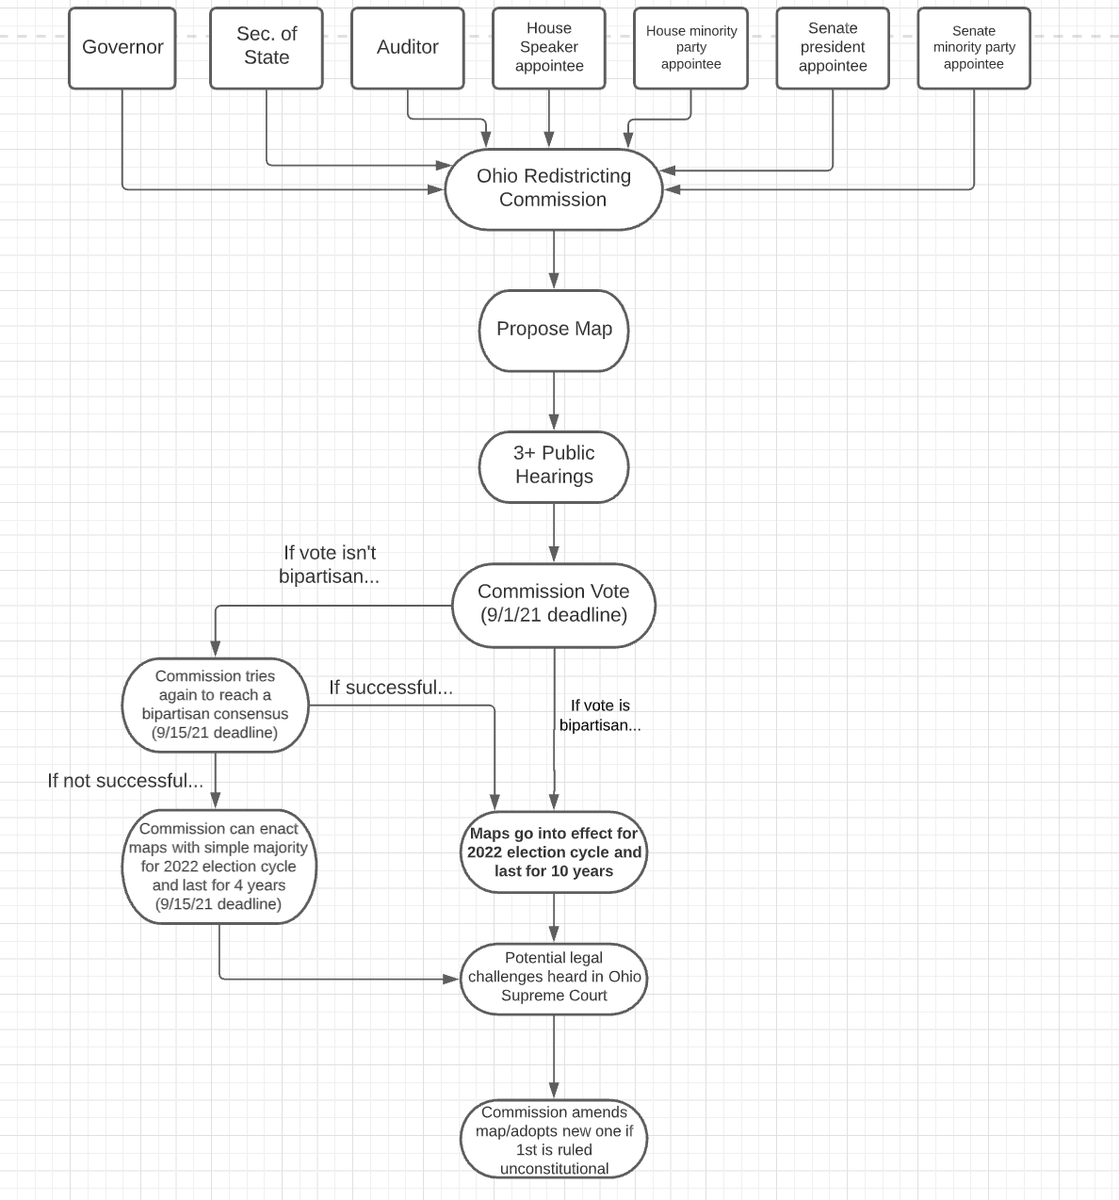 I made these flow charts to show the processes. (I suggest right-click + open in new tab to see them in full view)Left is the process for state redistricting (Ohio House + Ohio Senate). Right is process for federal redistricting (U.S. House) https://ohiocapitaljournal.com/2021/02/15/census-data-delays-may-significantly-impact-ohio-redistricting-process/